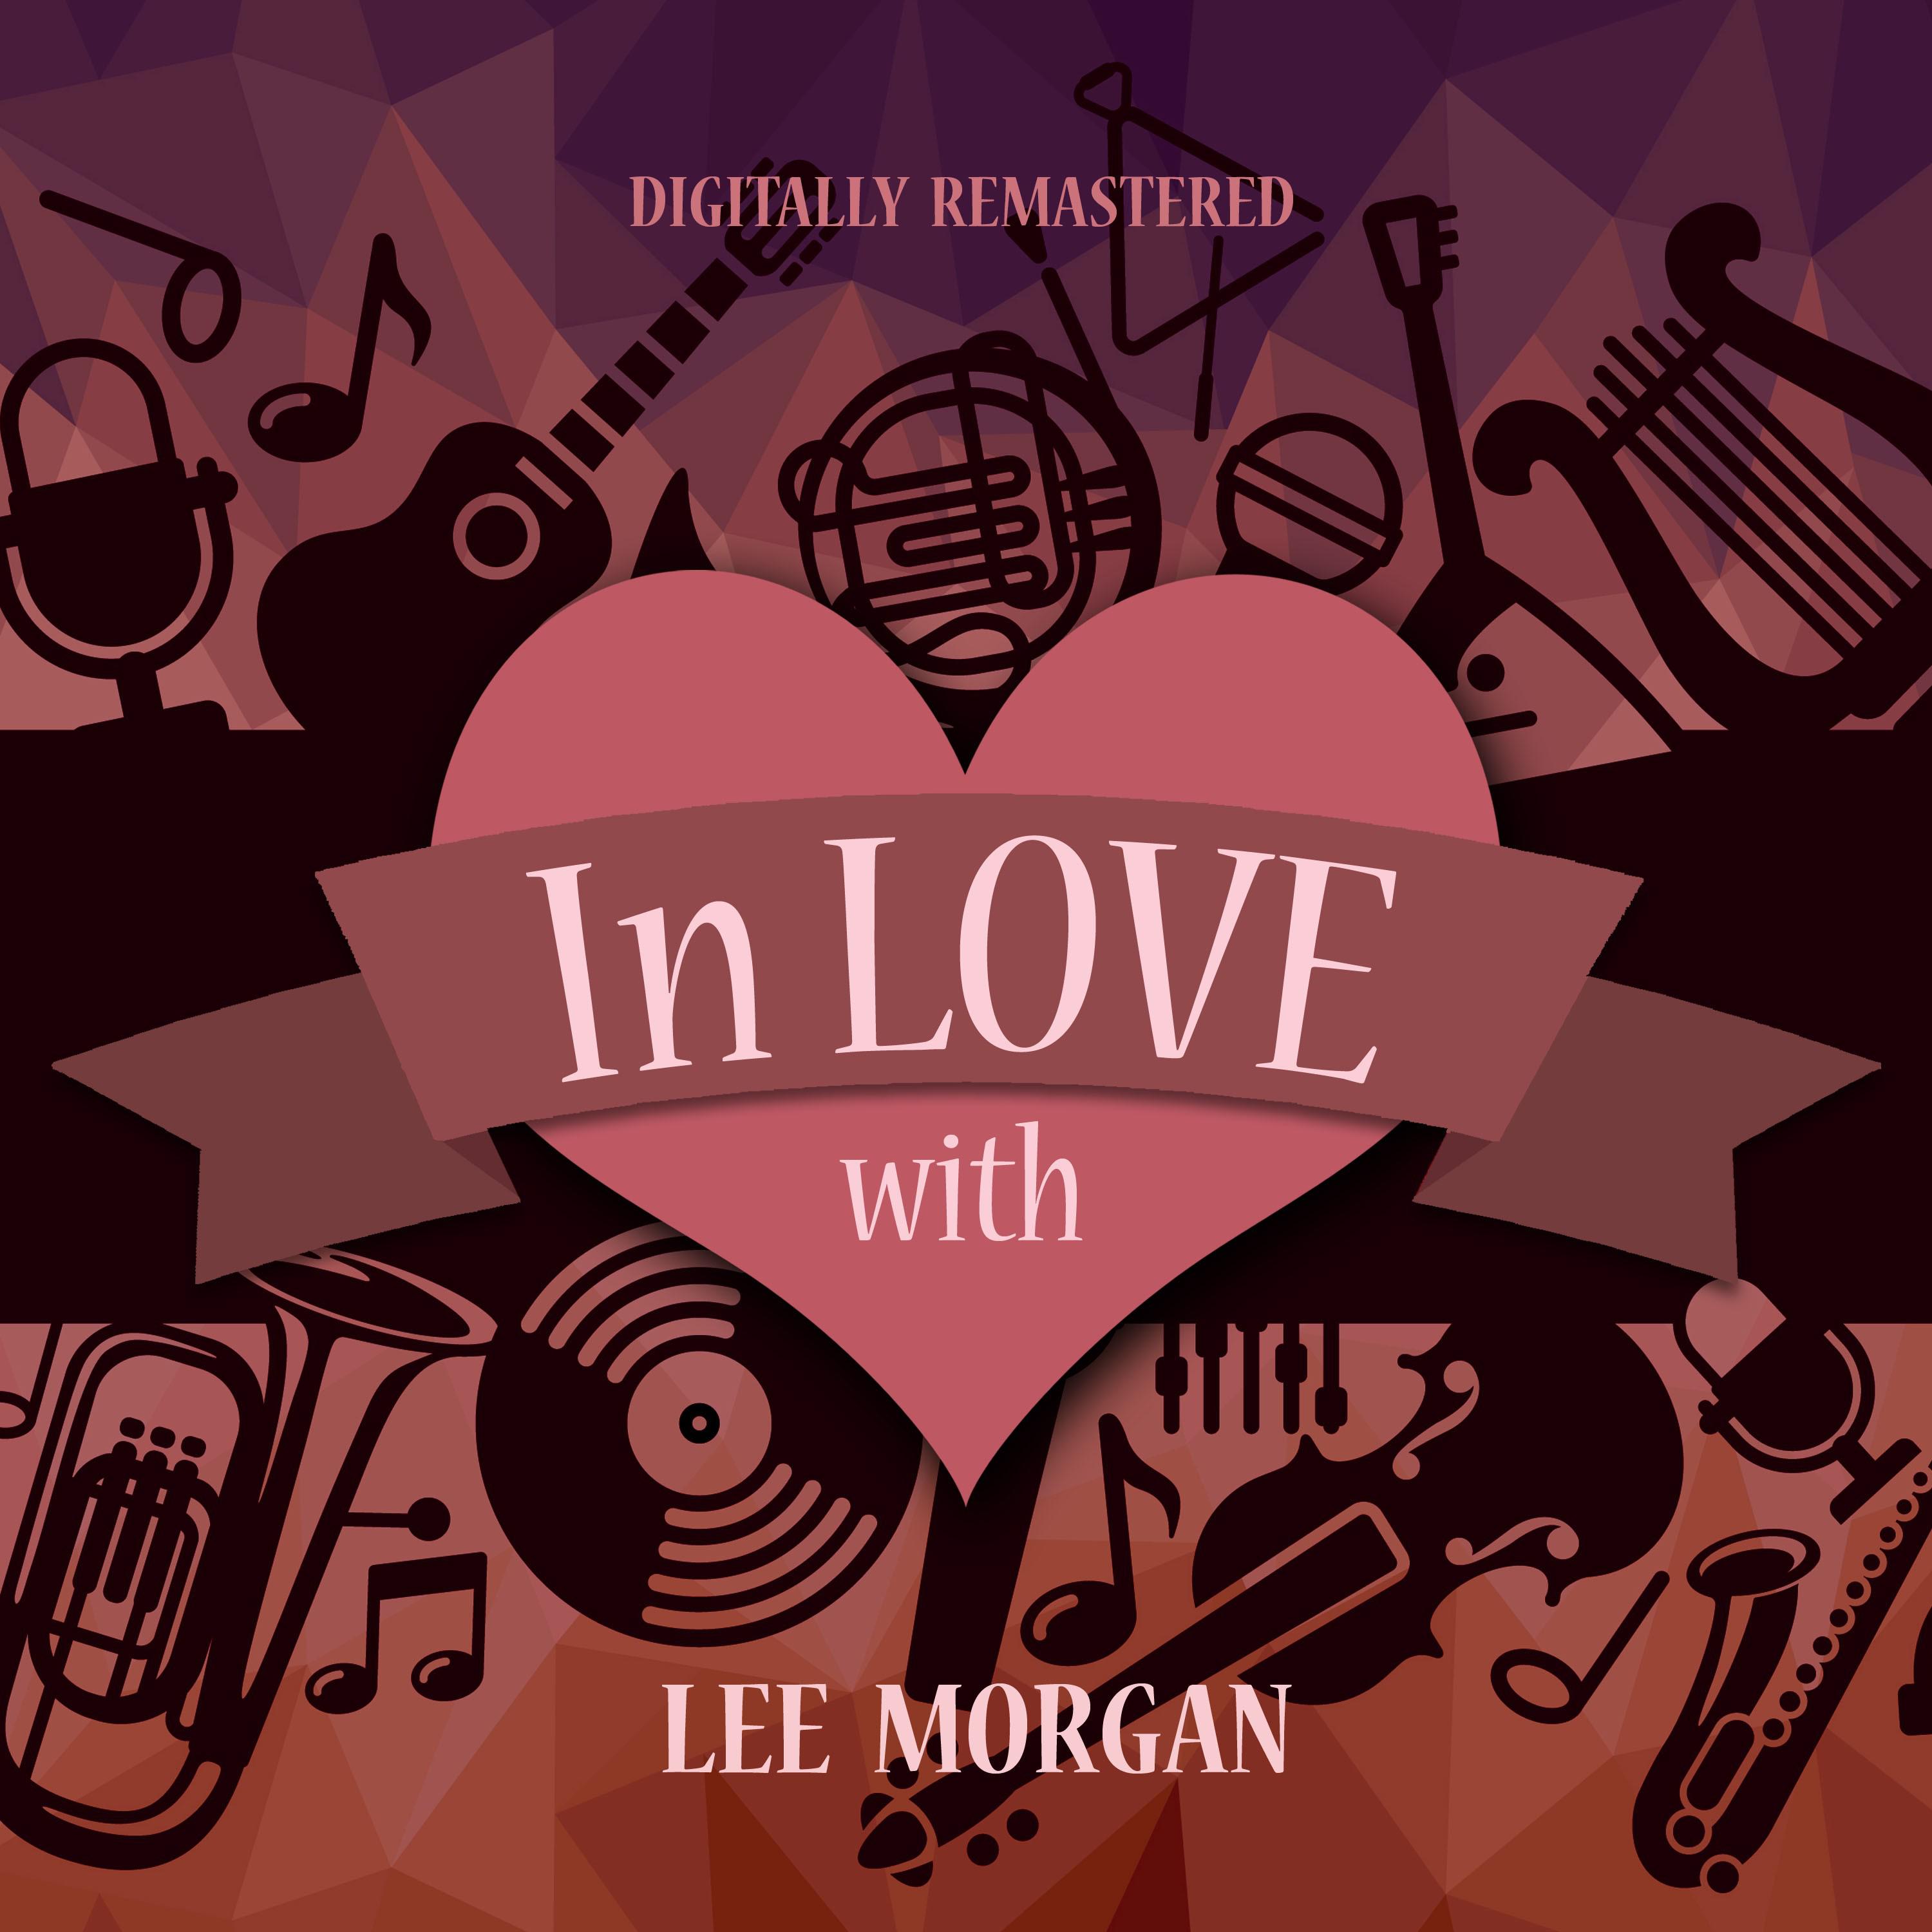 In Love with Lee Morgan (Digitally Remastered)